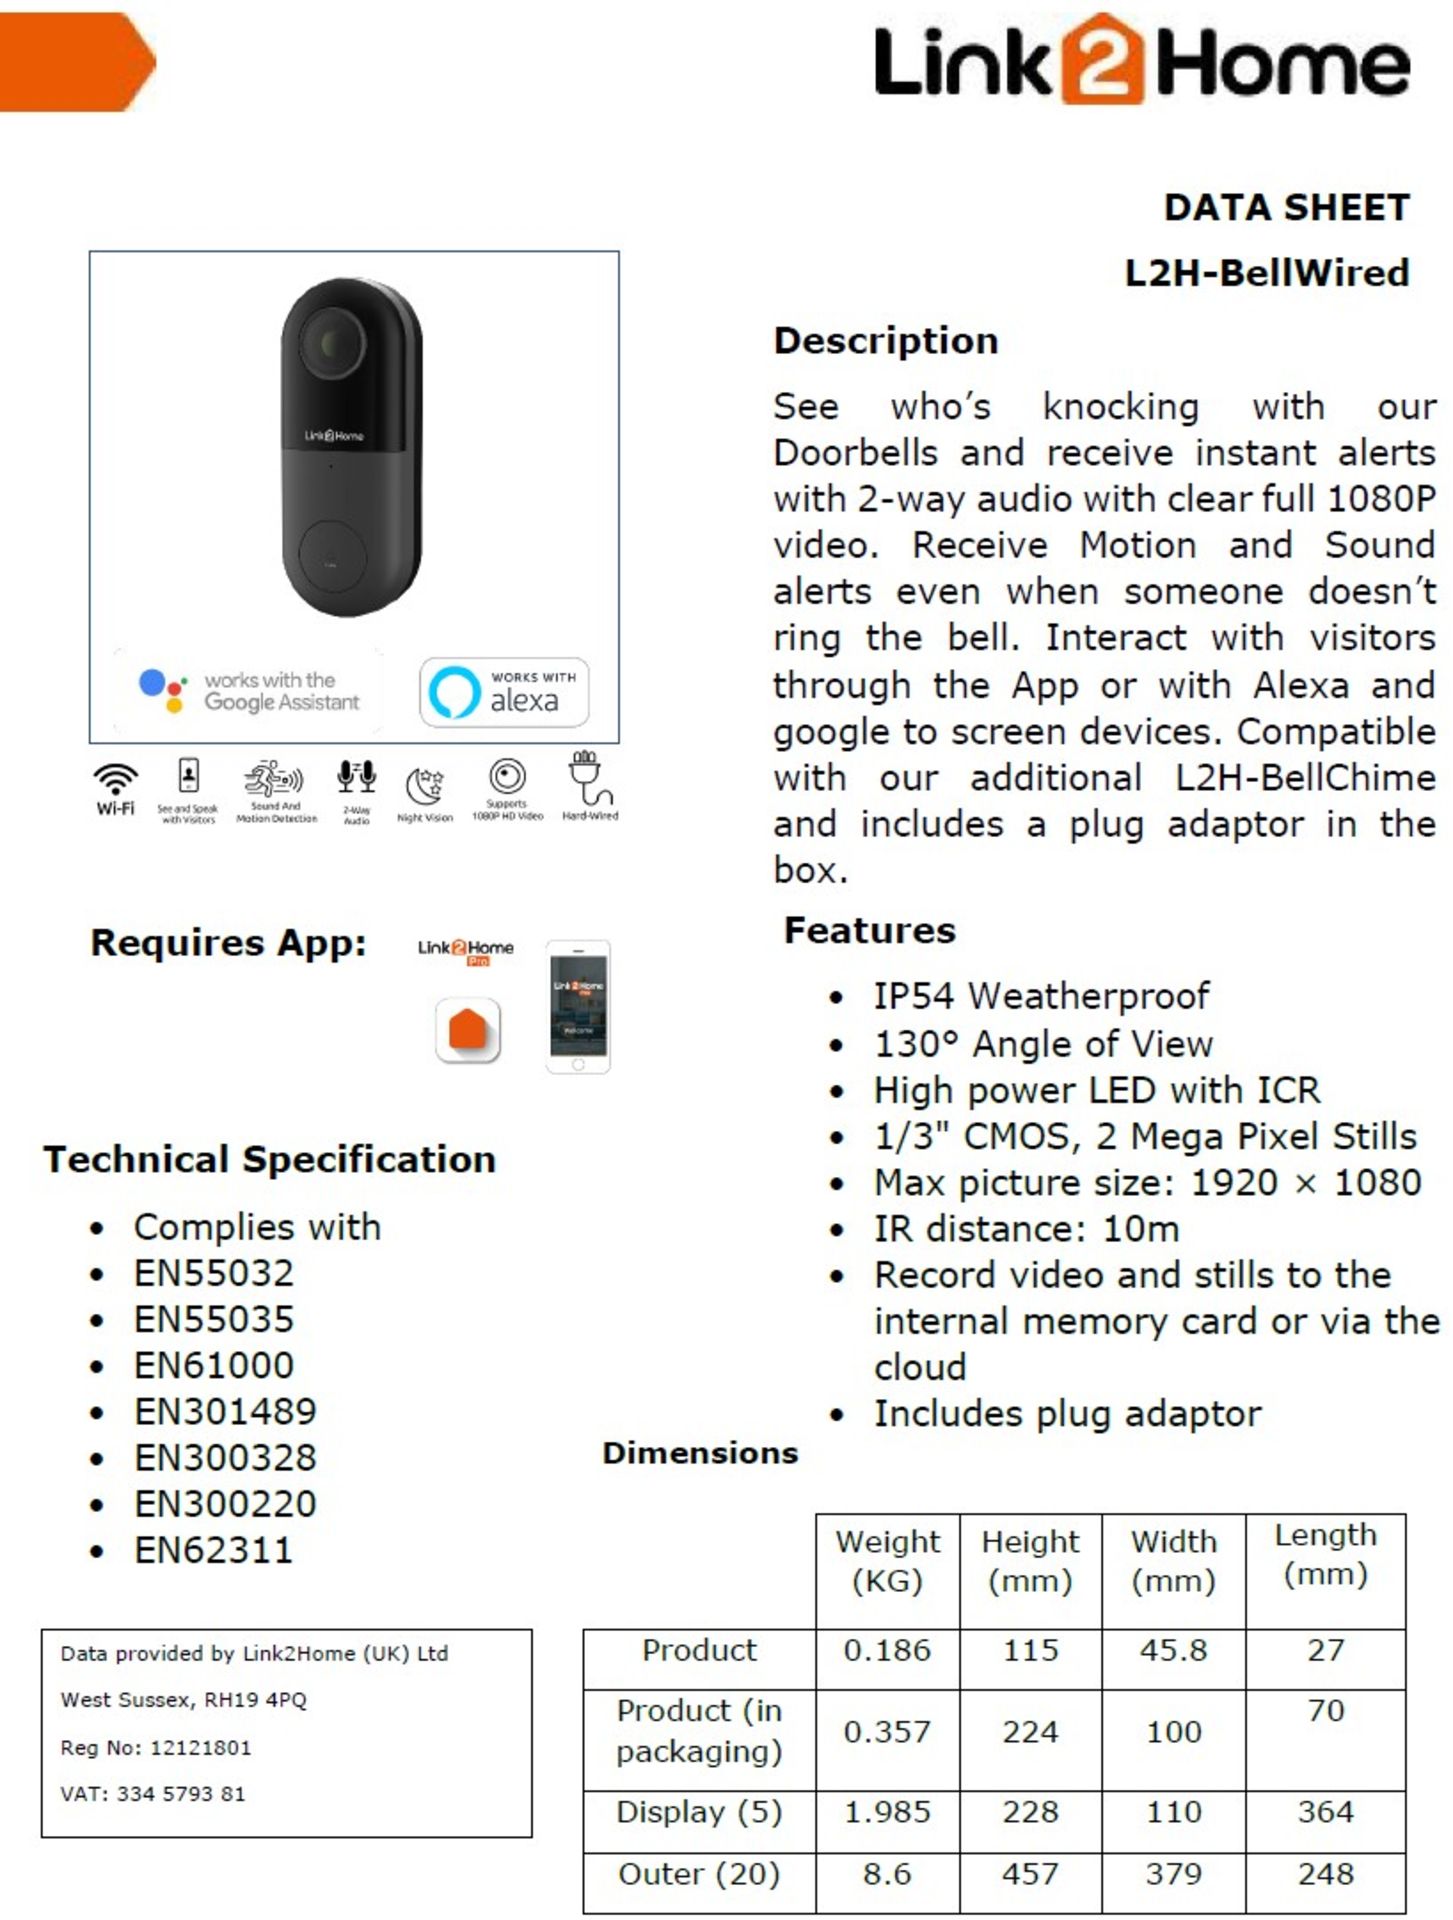 2 x Link2Home 'L2H BellWired' Hard Wired Doorbell/Cameras - New, boxed stock RRP £99. - Image 7 of 13